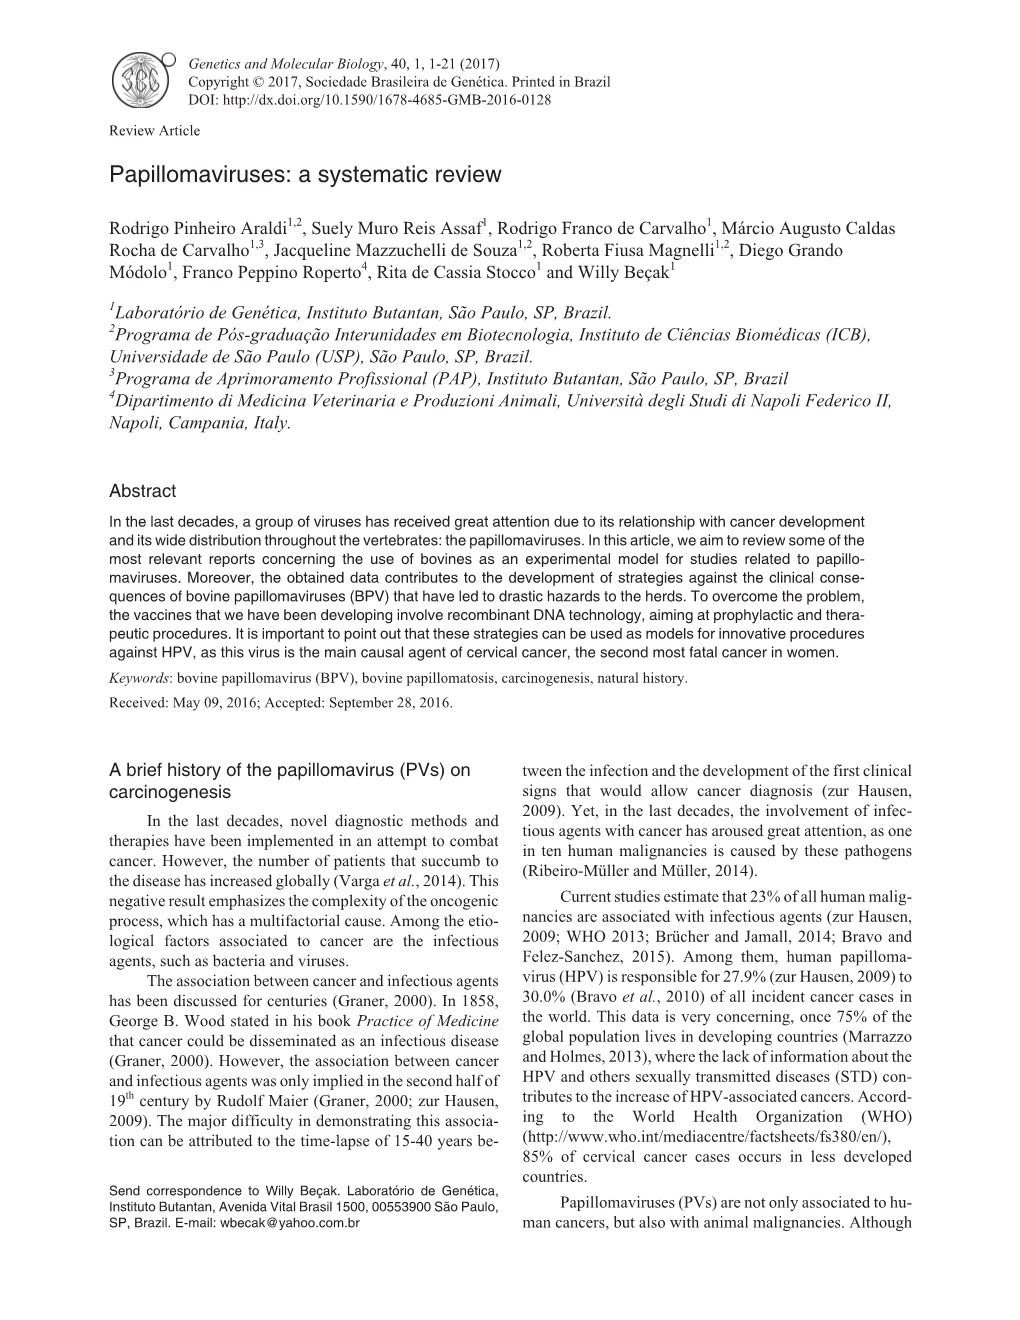 Papillomaviruses: a Systematic Review